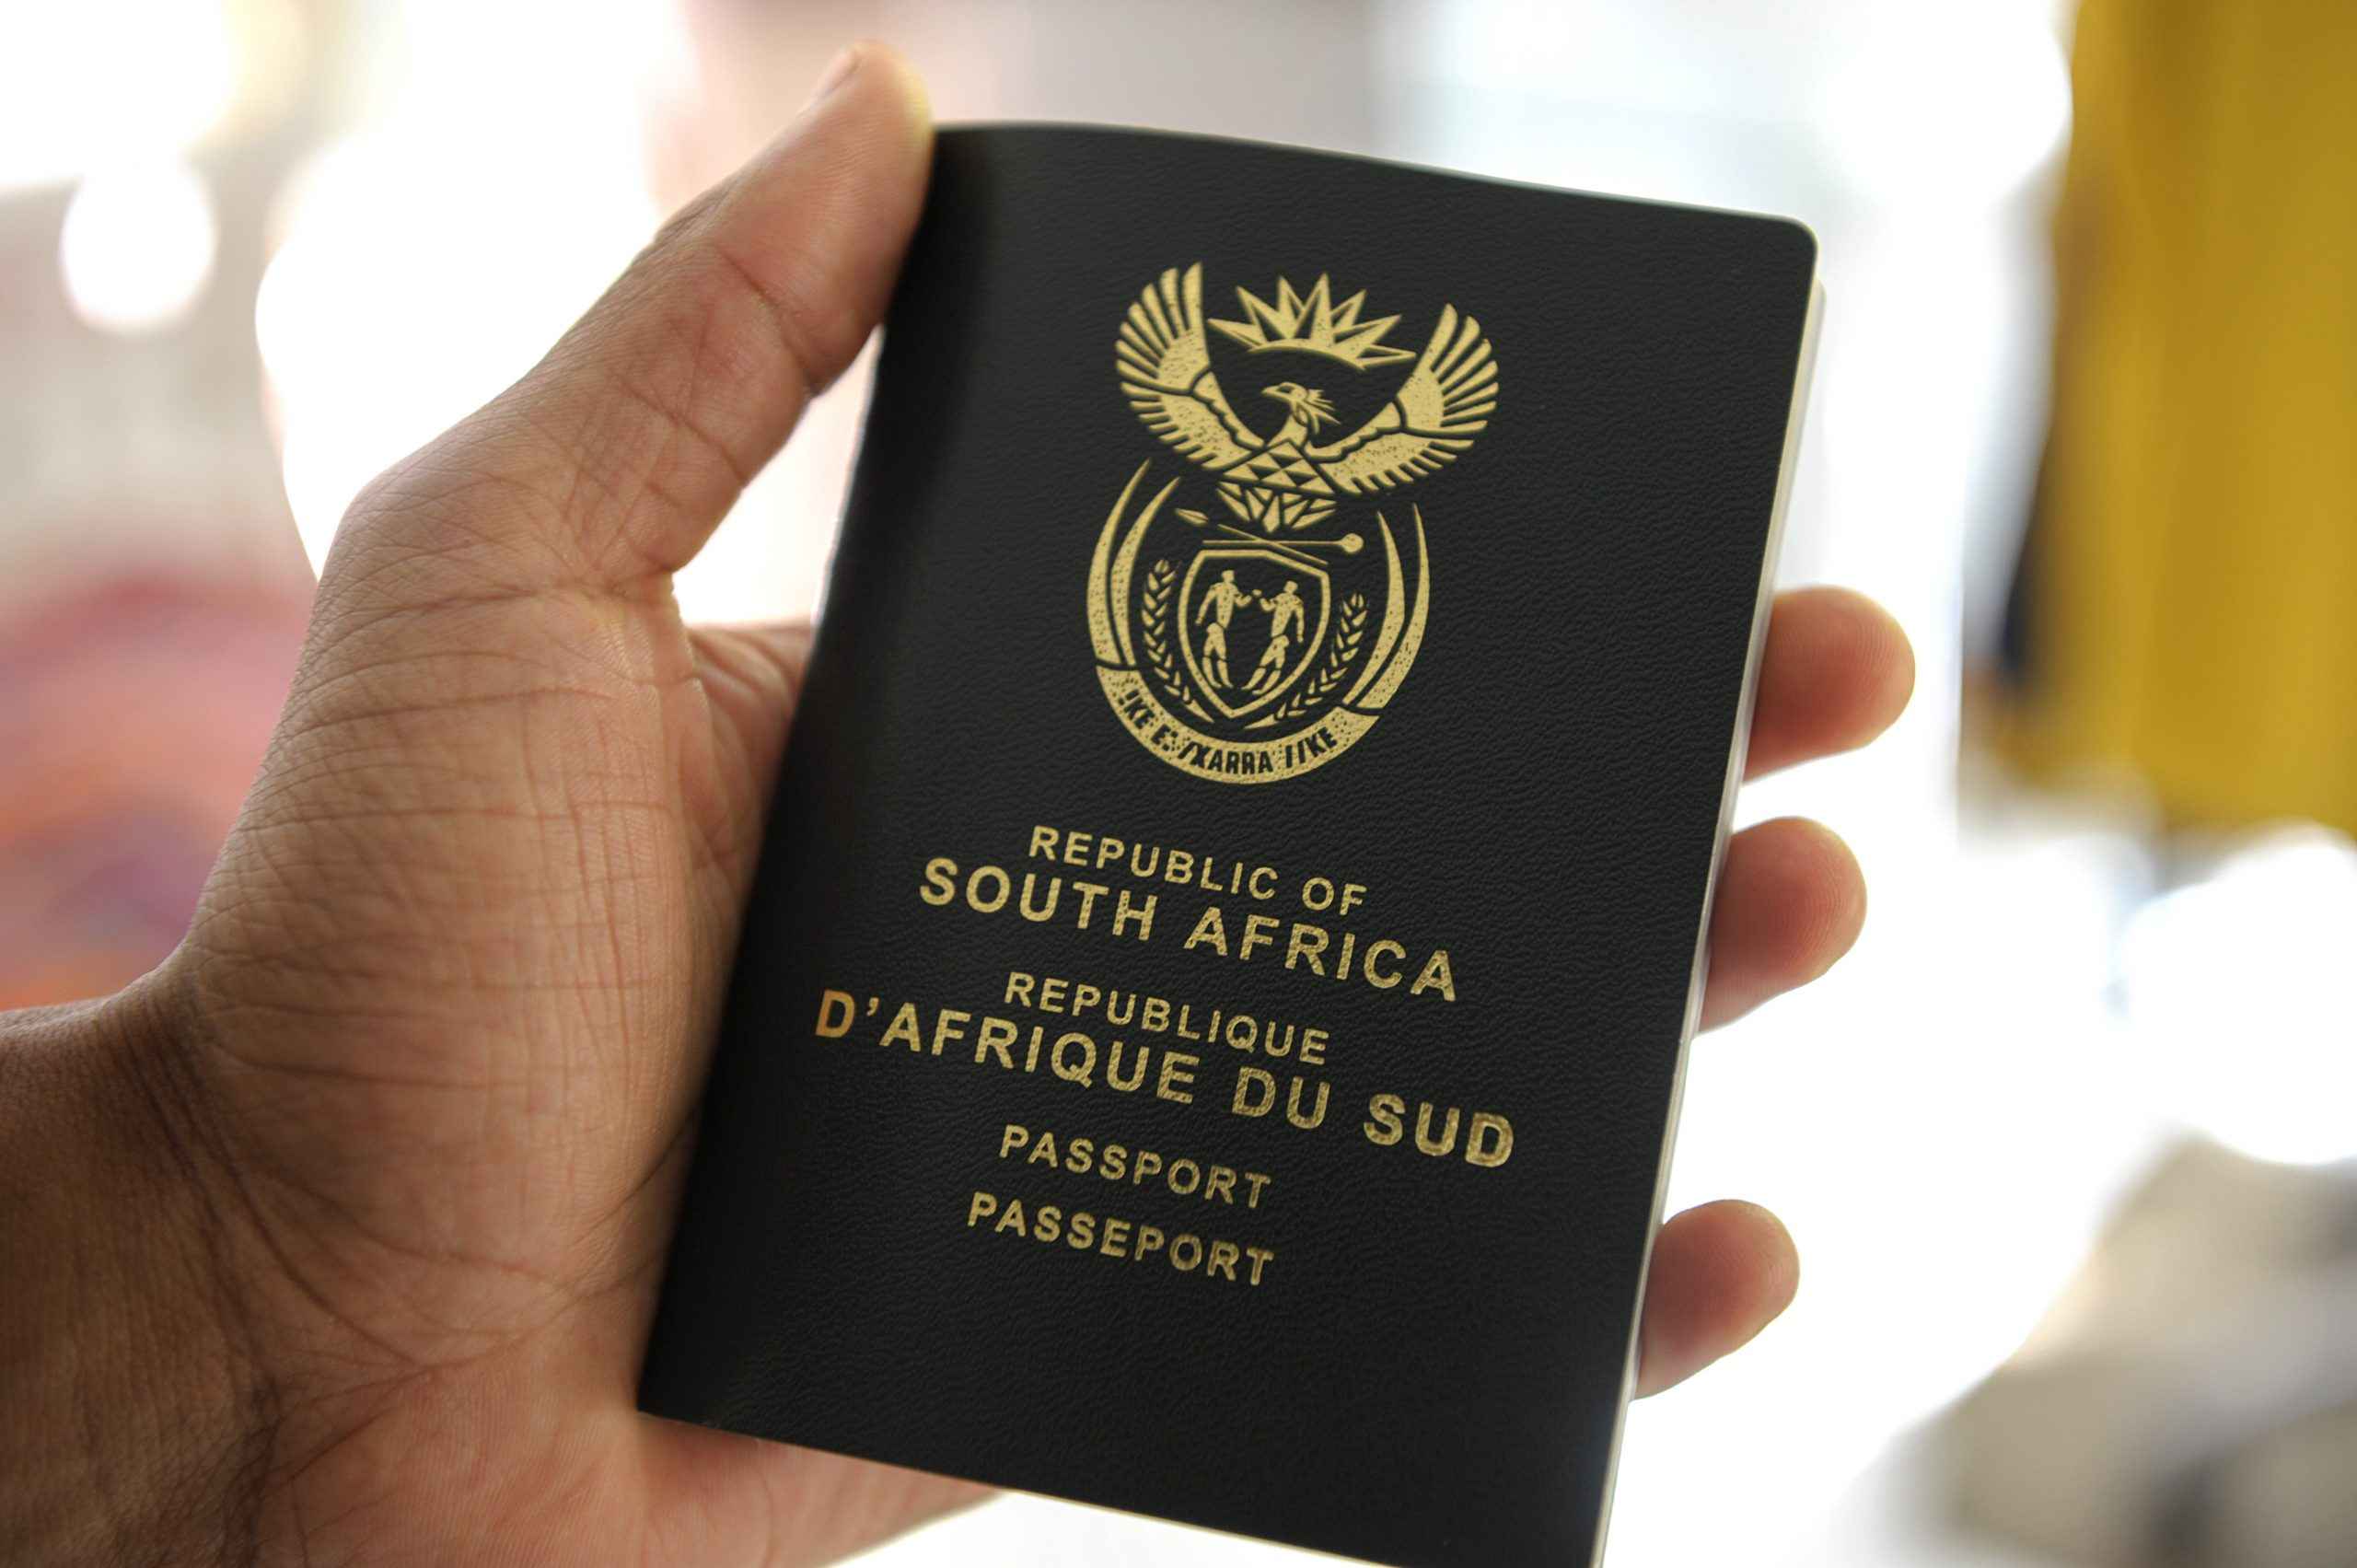 How Much is Passport in South Africa